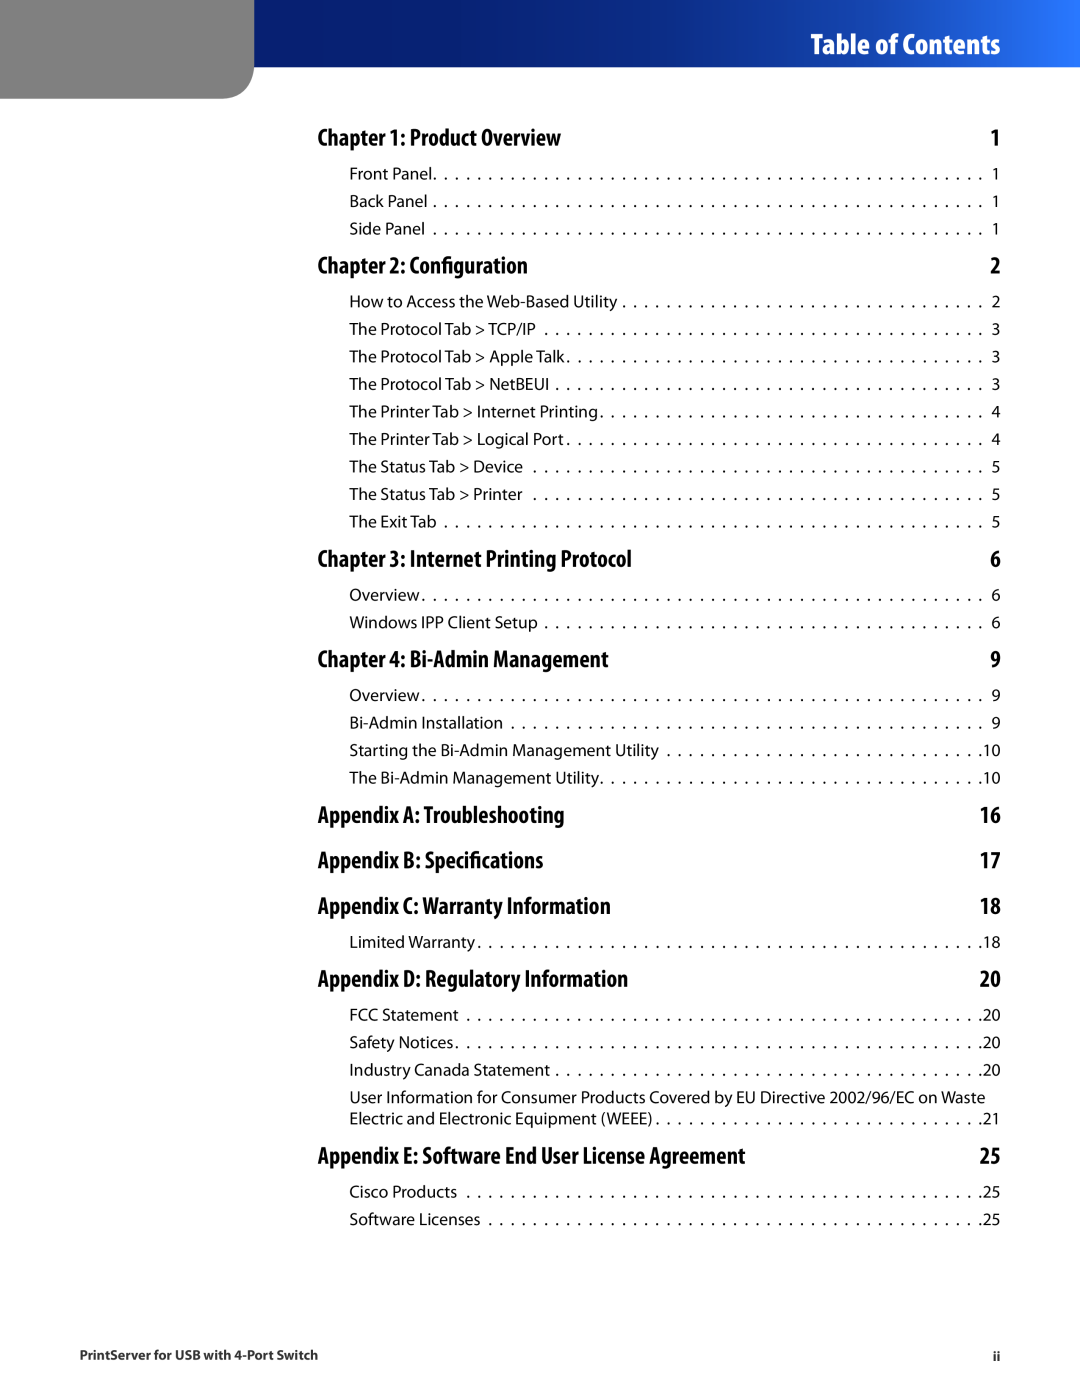 Cisco Systems PSUS4 Table of Contents, Product Overview, Configuration, Bi-Admin Management, Appendix A Troubleshooting 